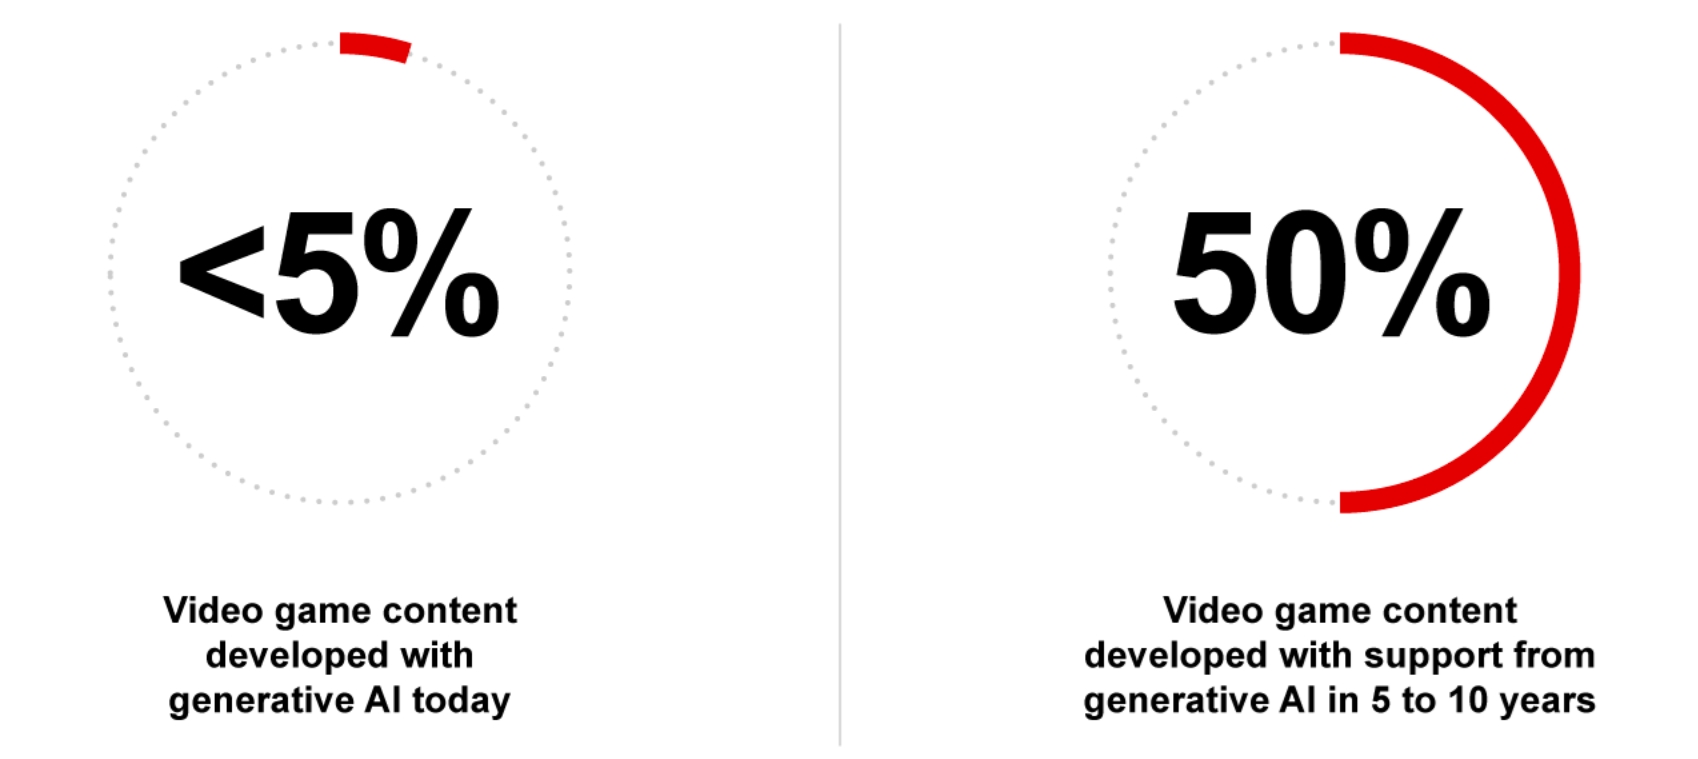 A Study Done By Bain Shows How Much Game Content Generative AI Will Account For In 5-10 Years